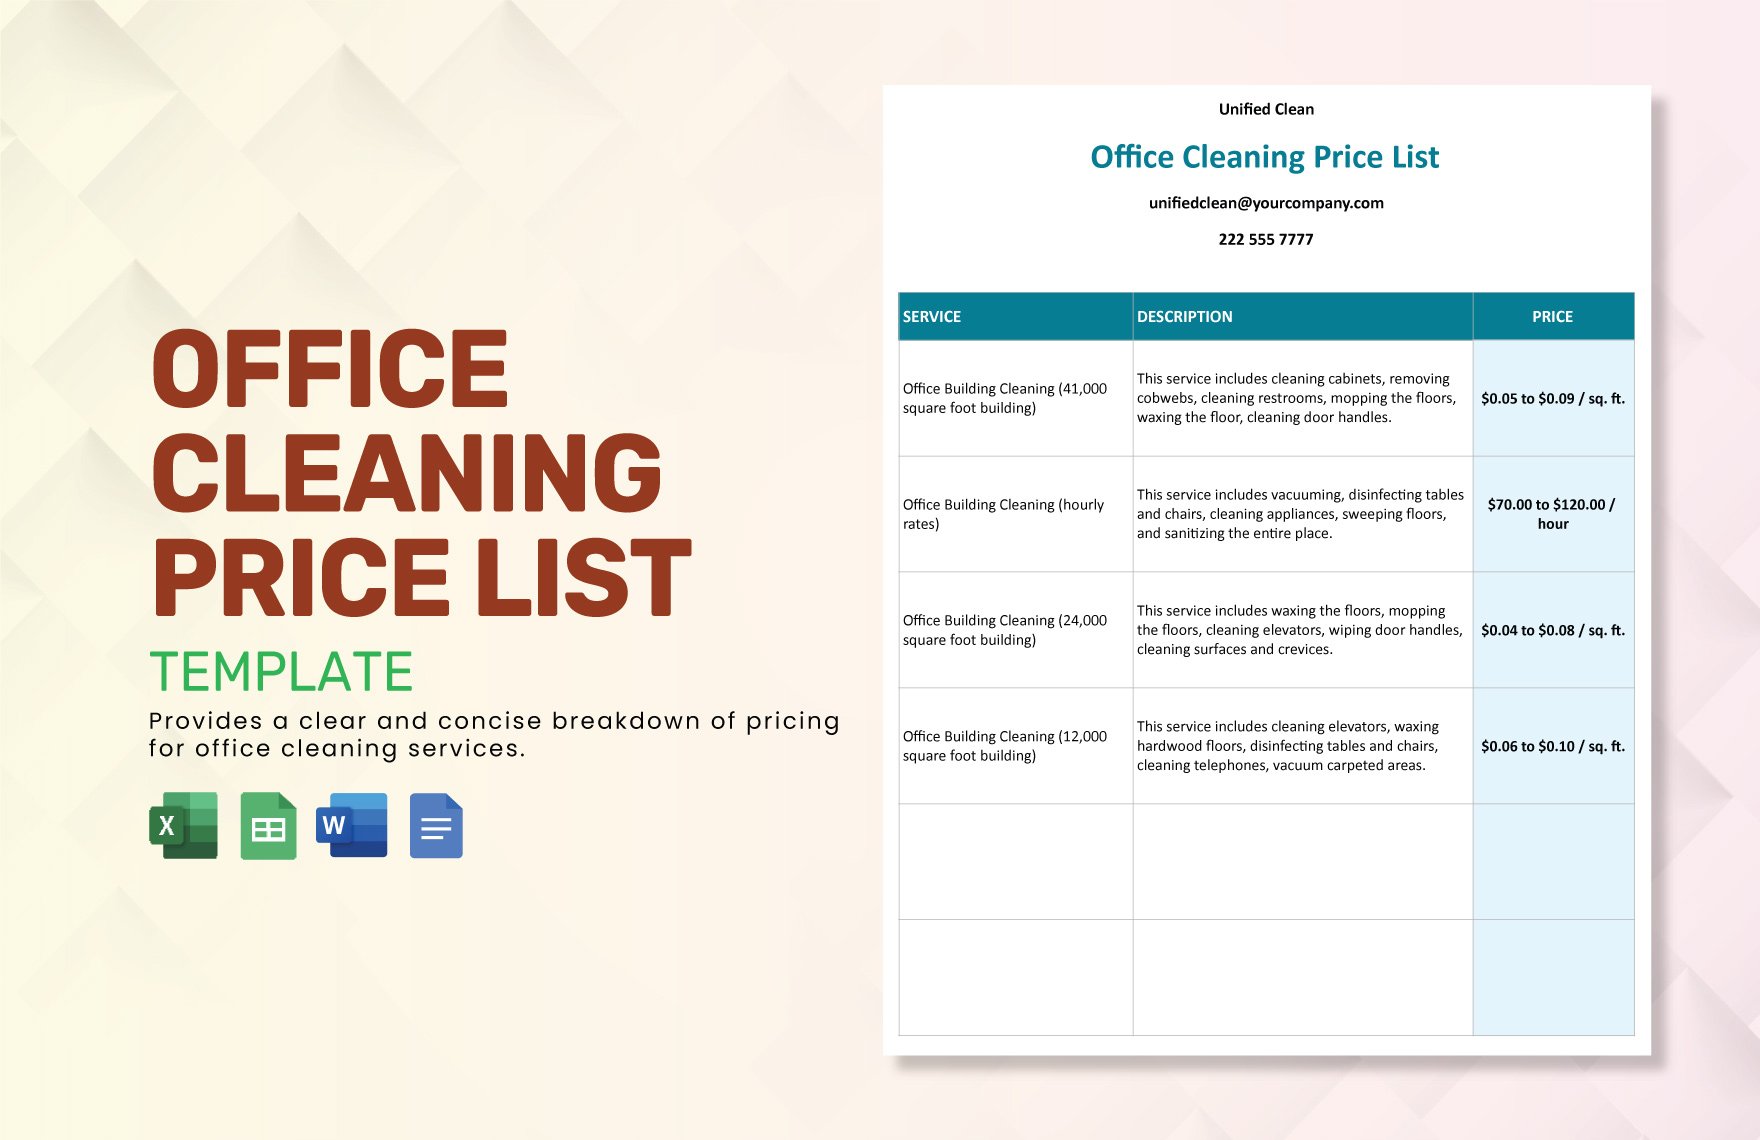 Office Cleaning Price List Template in Word, Google Docs, Excel, Google Sheets